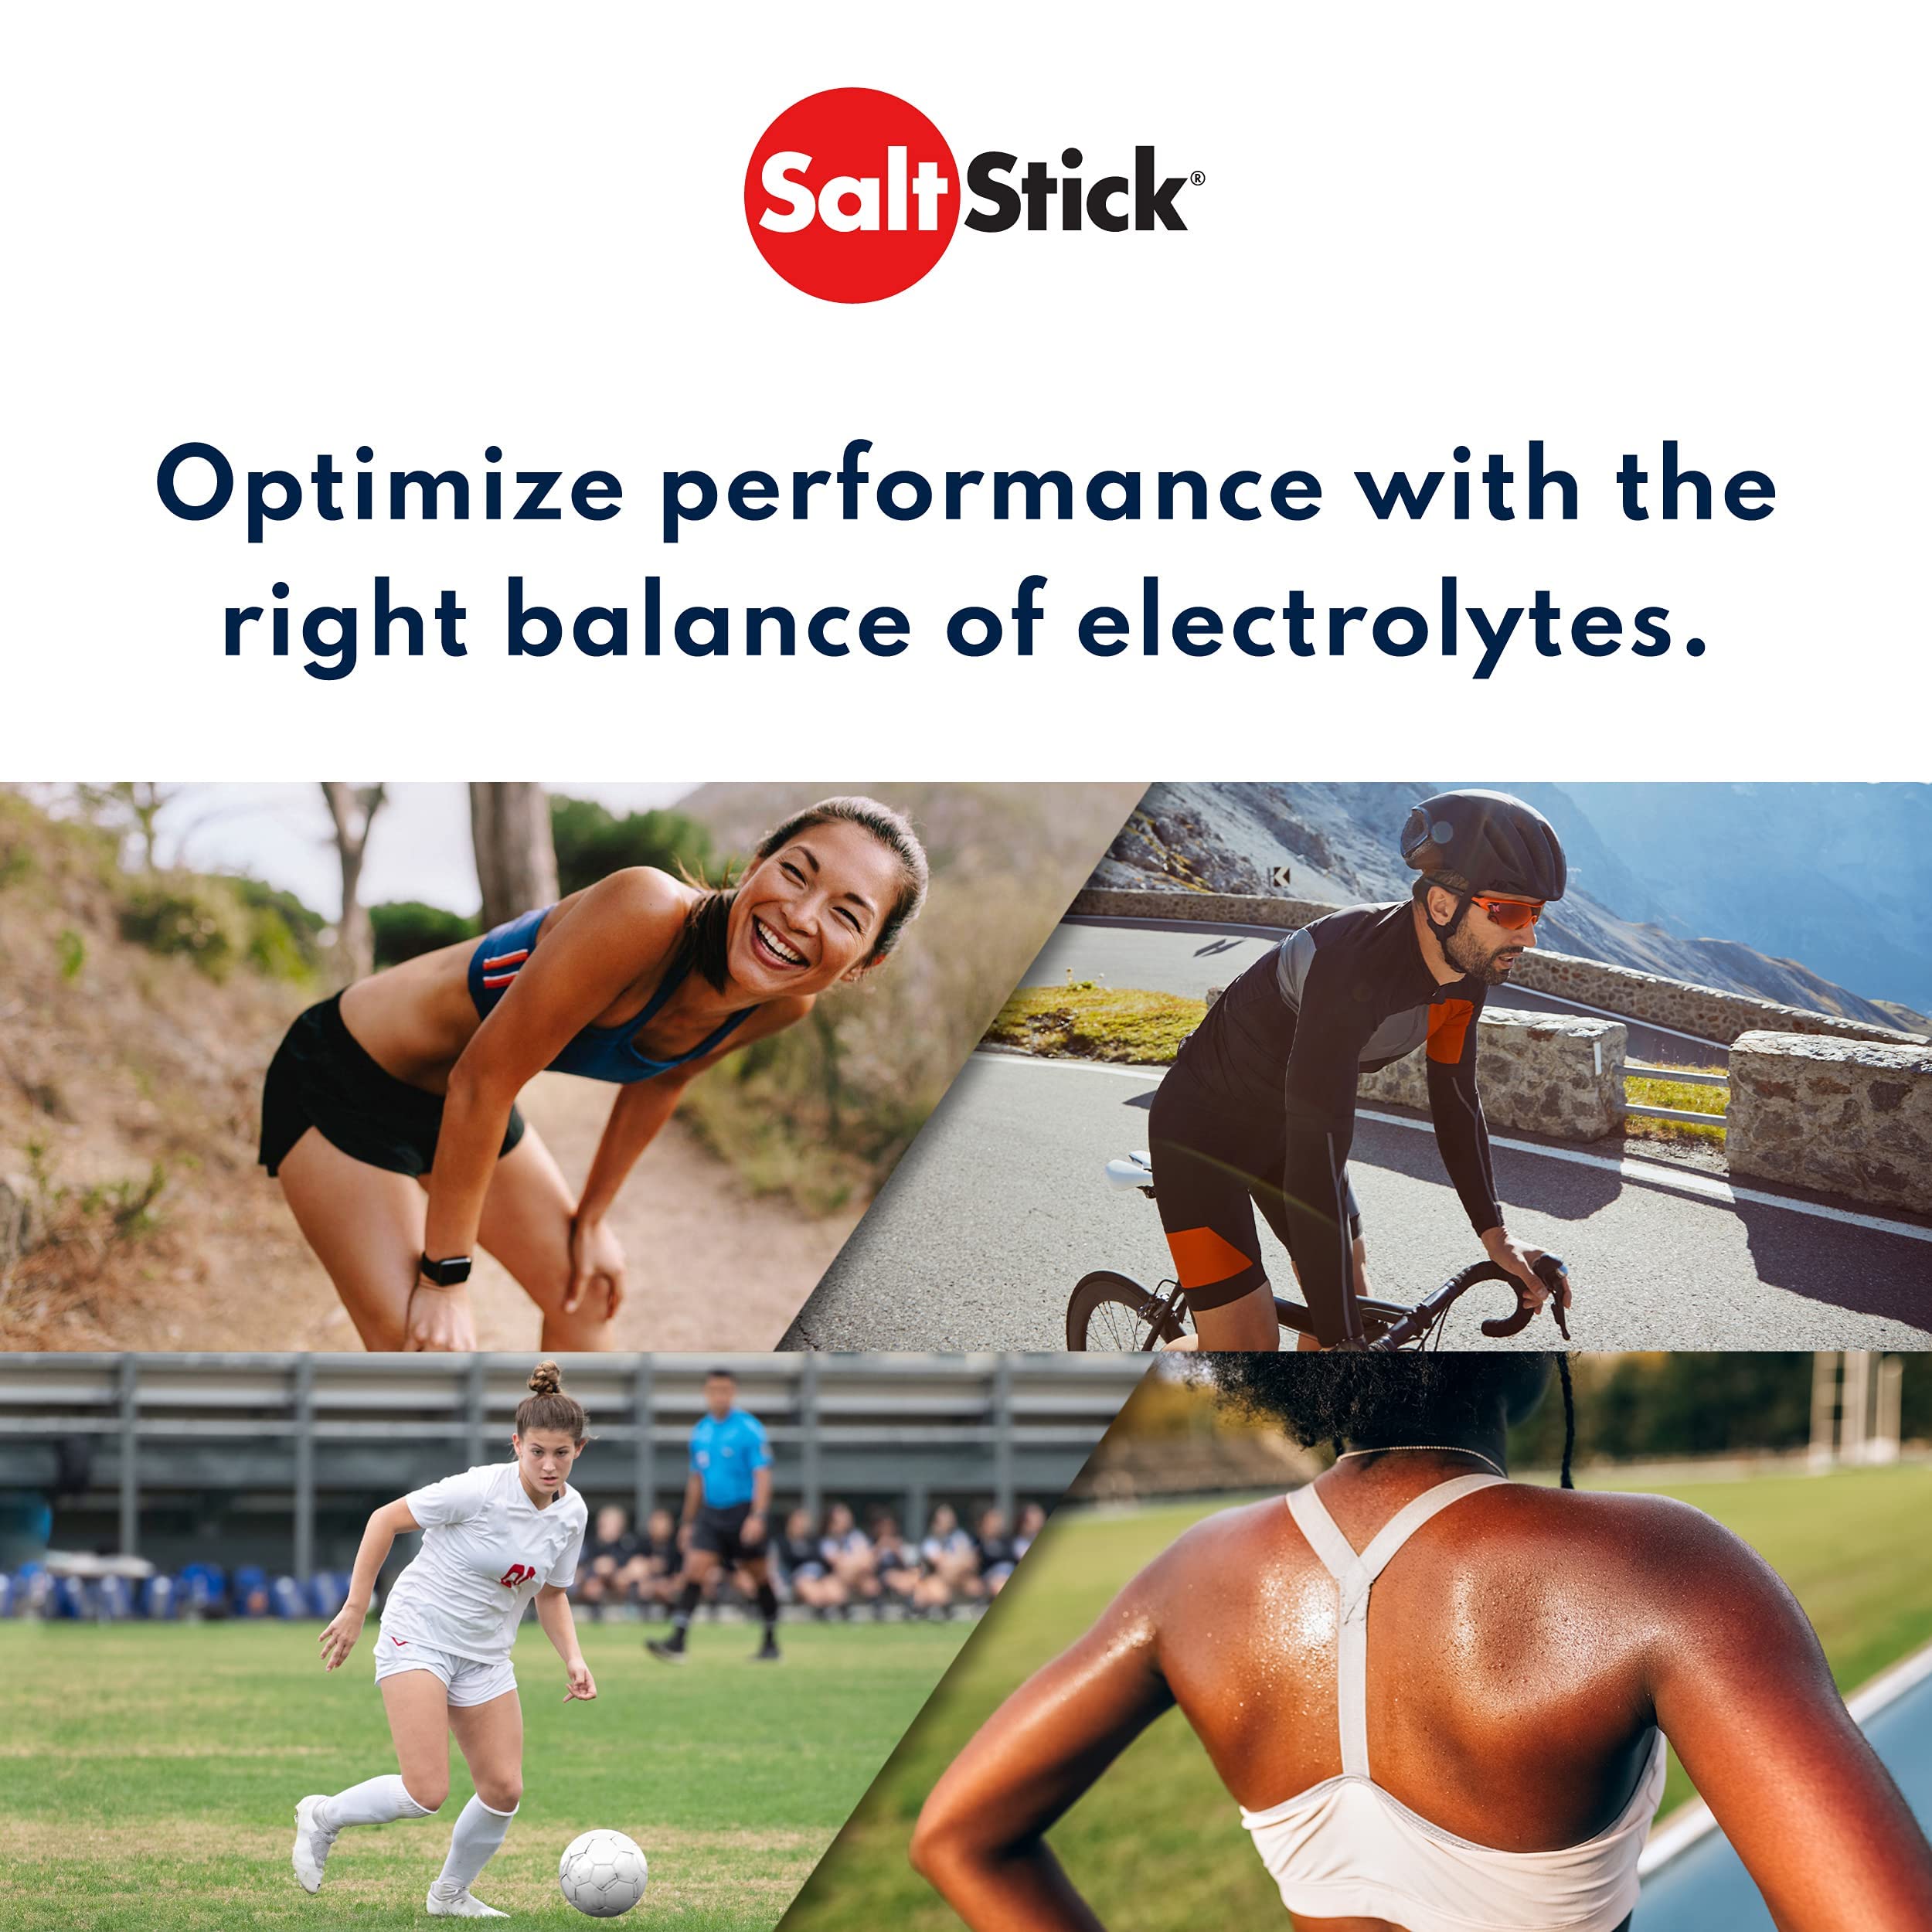 SaltStick Electrolyte Capsules - Salt Pills and Electrolytes for Running, Hydration, Leg Cramps Relief, Sports Recovery, Hiking Essentials - Salt, Magnesium, Potassium, Vitamin D3 - 100 Capsules